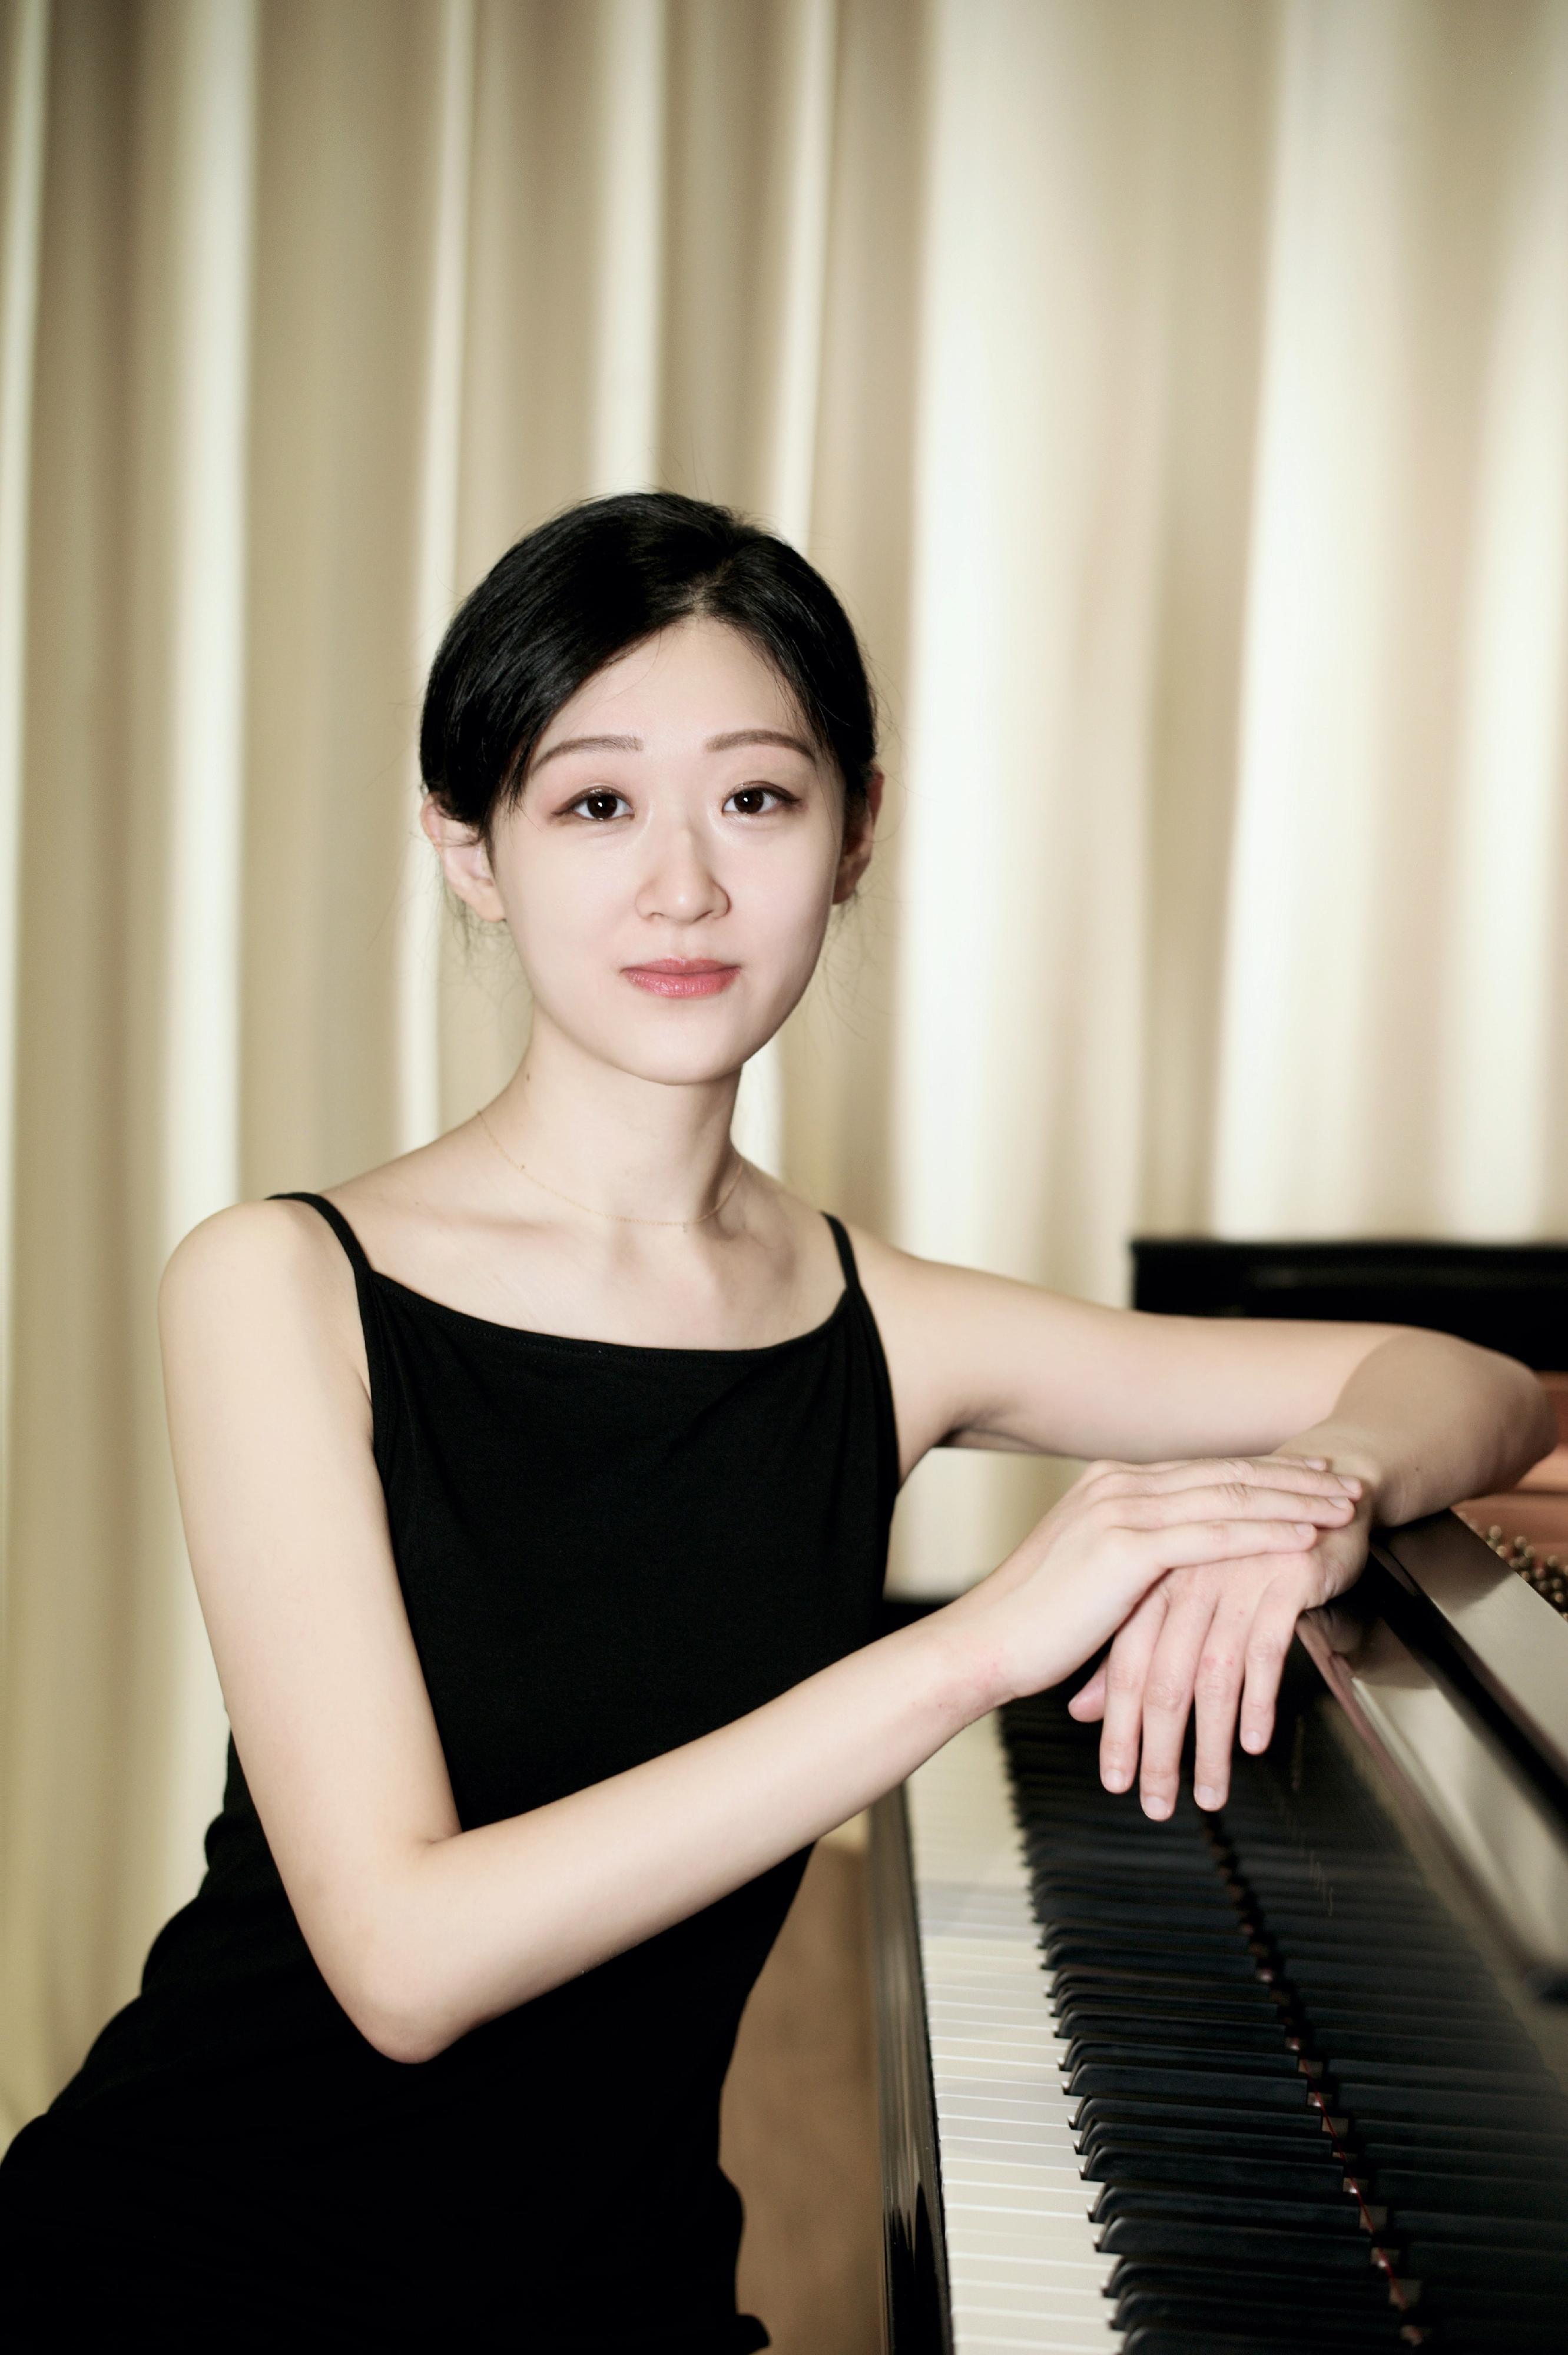 The Leisure and Cultural Services Department will present "The Contemporary Classics" concert in early October. Photo shows pianist Dora Tsang.